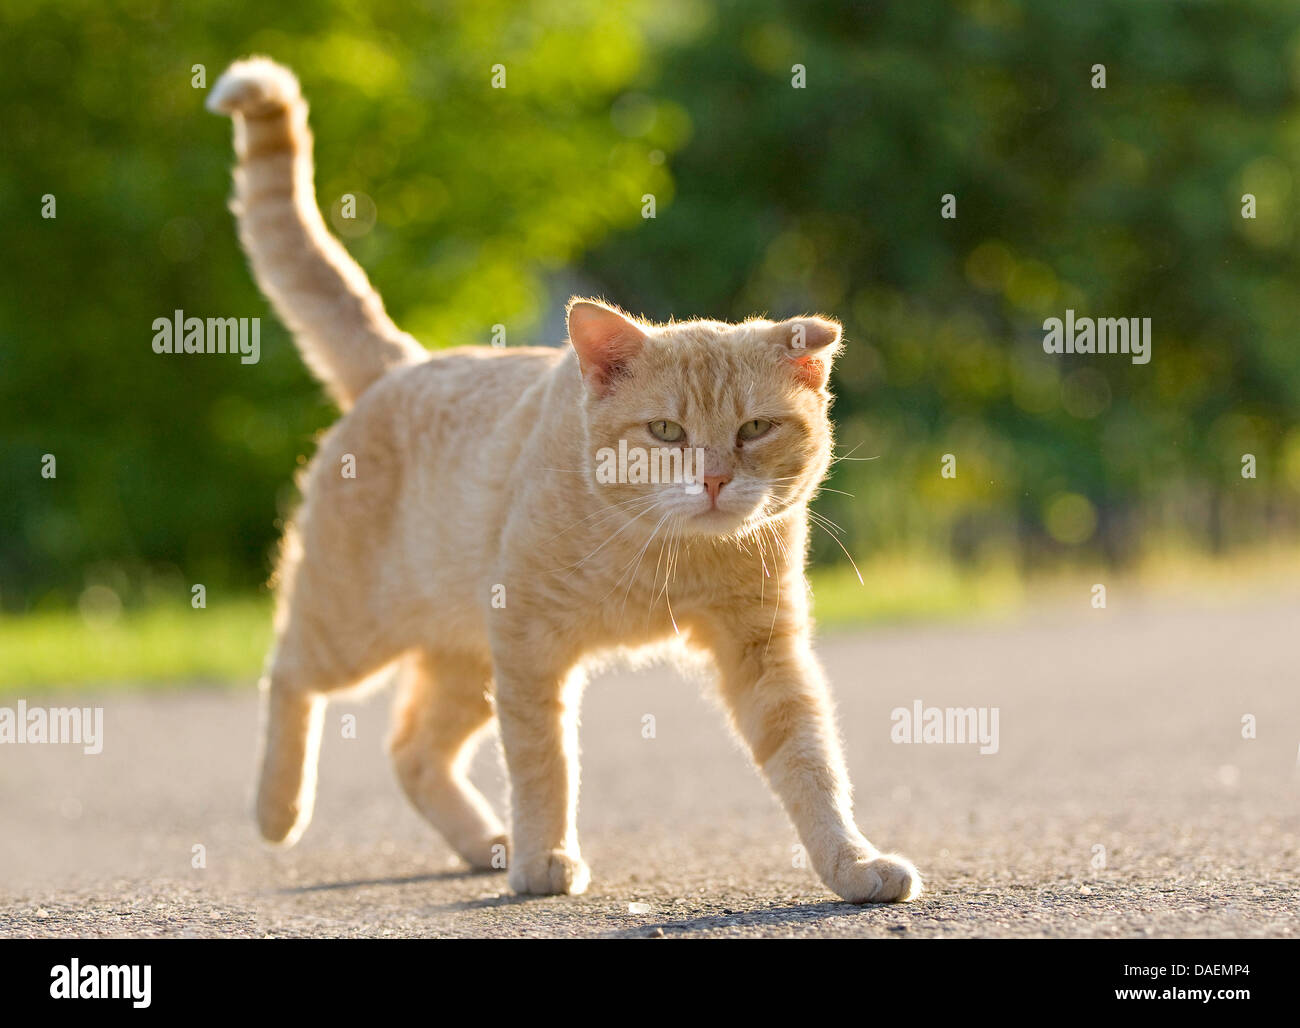 domestic cat, house cat (Felis silvestris f. catus), red striped tomcat walking on a path, Germany Stock Photo